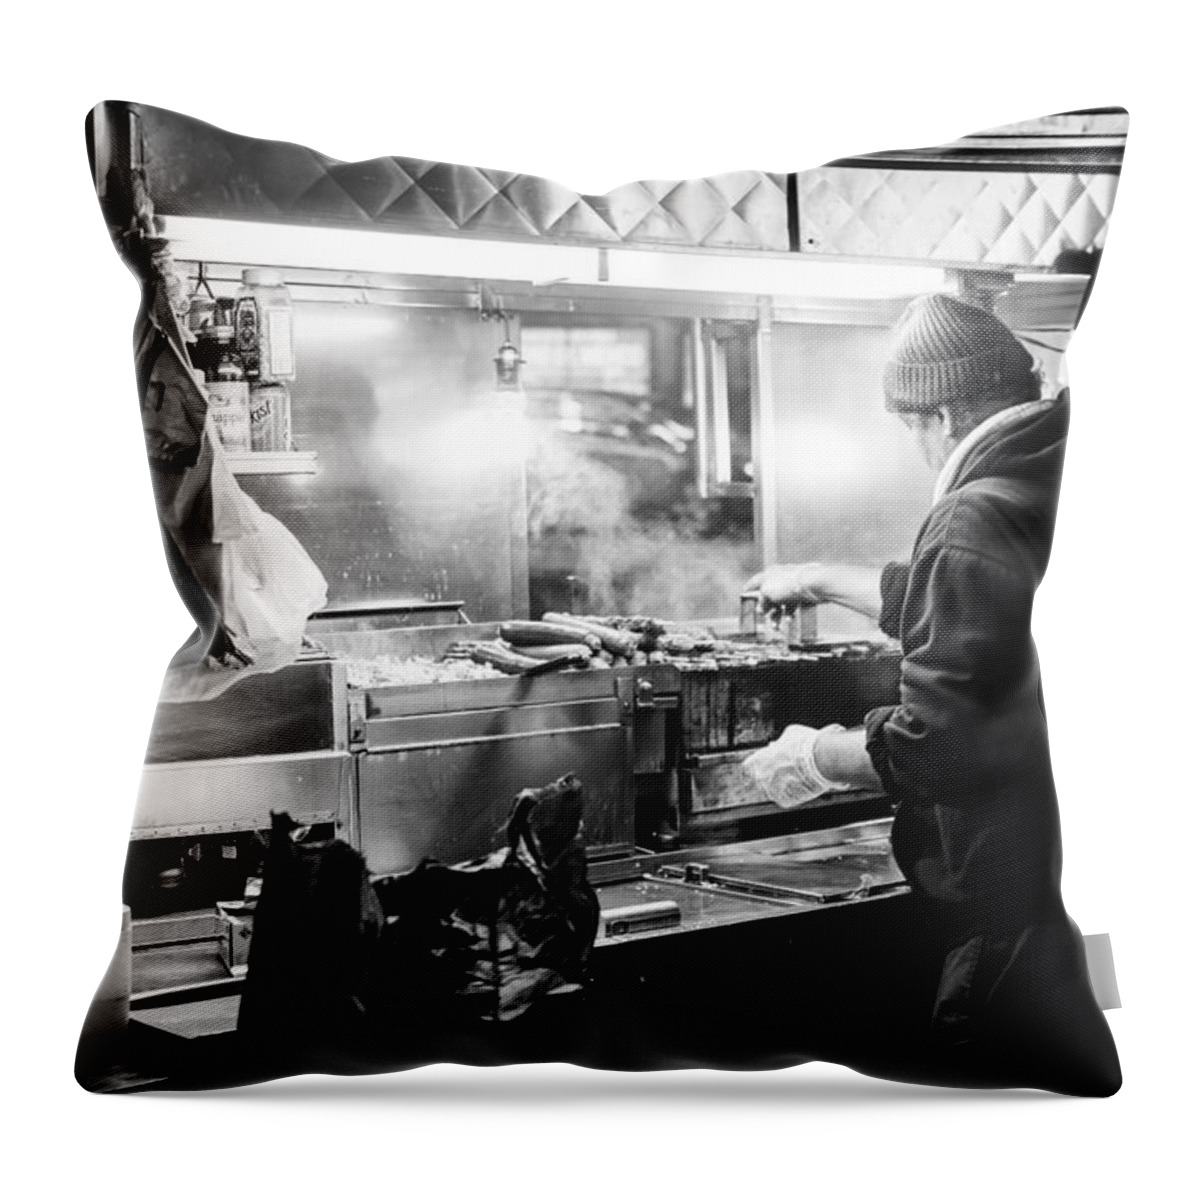 City Throw Pillow featuring the photograph New York City Street Vendor by David Morefield